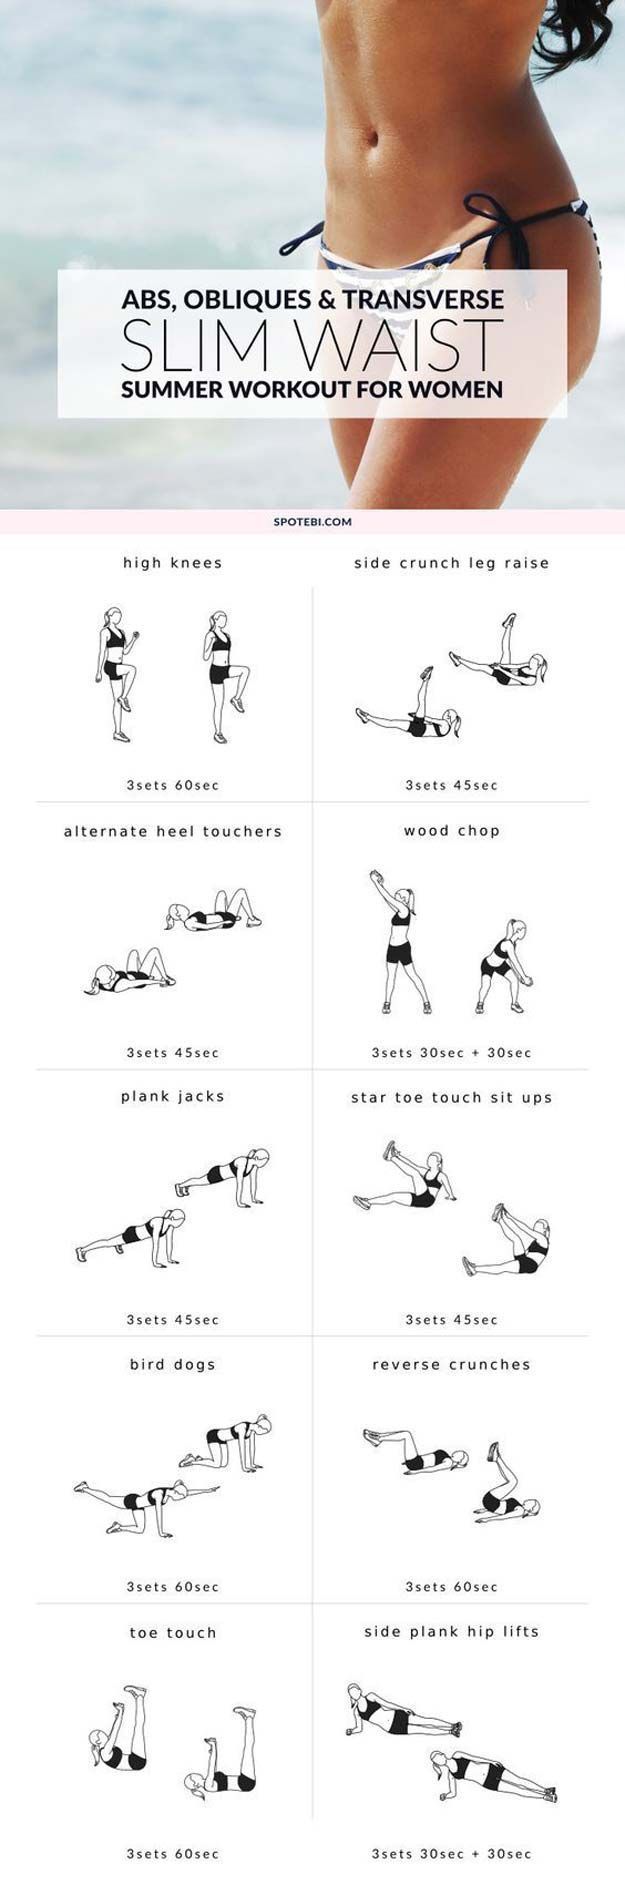 Best Exercises for Abs – At Home Waist Slimming Exercises For Women – Best Ab Exercises And Ab Workouts For A Flat Stomach,